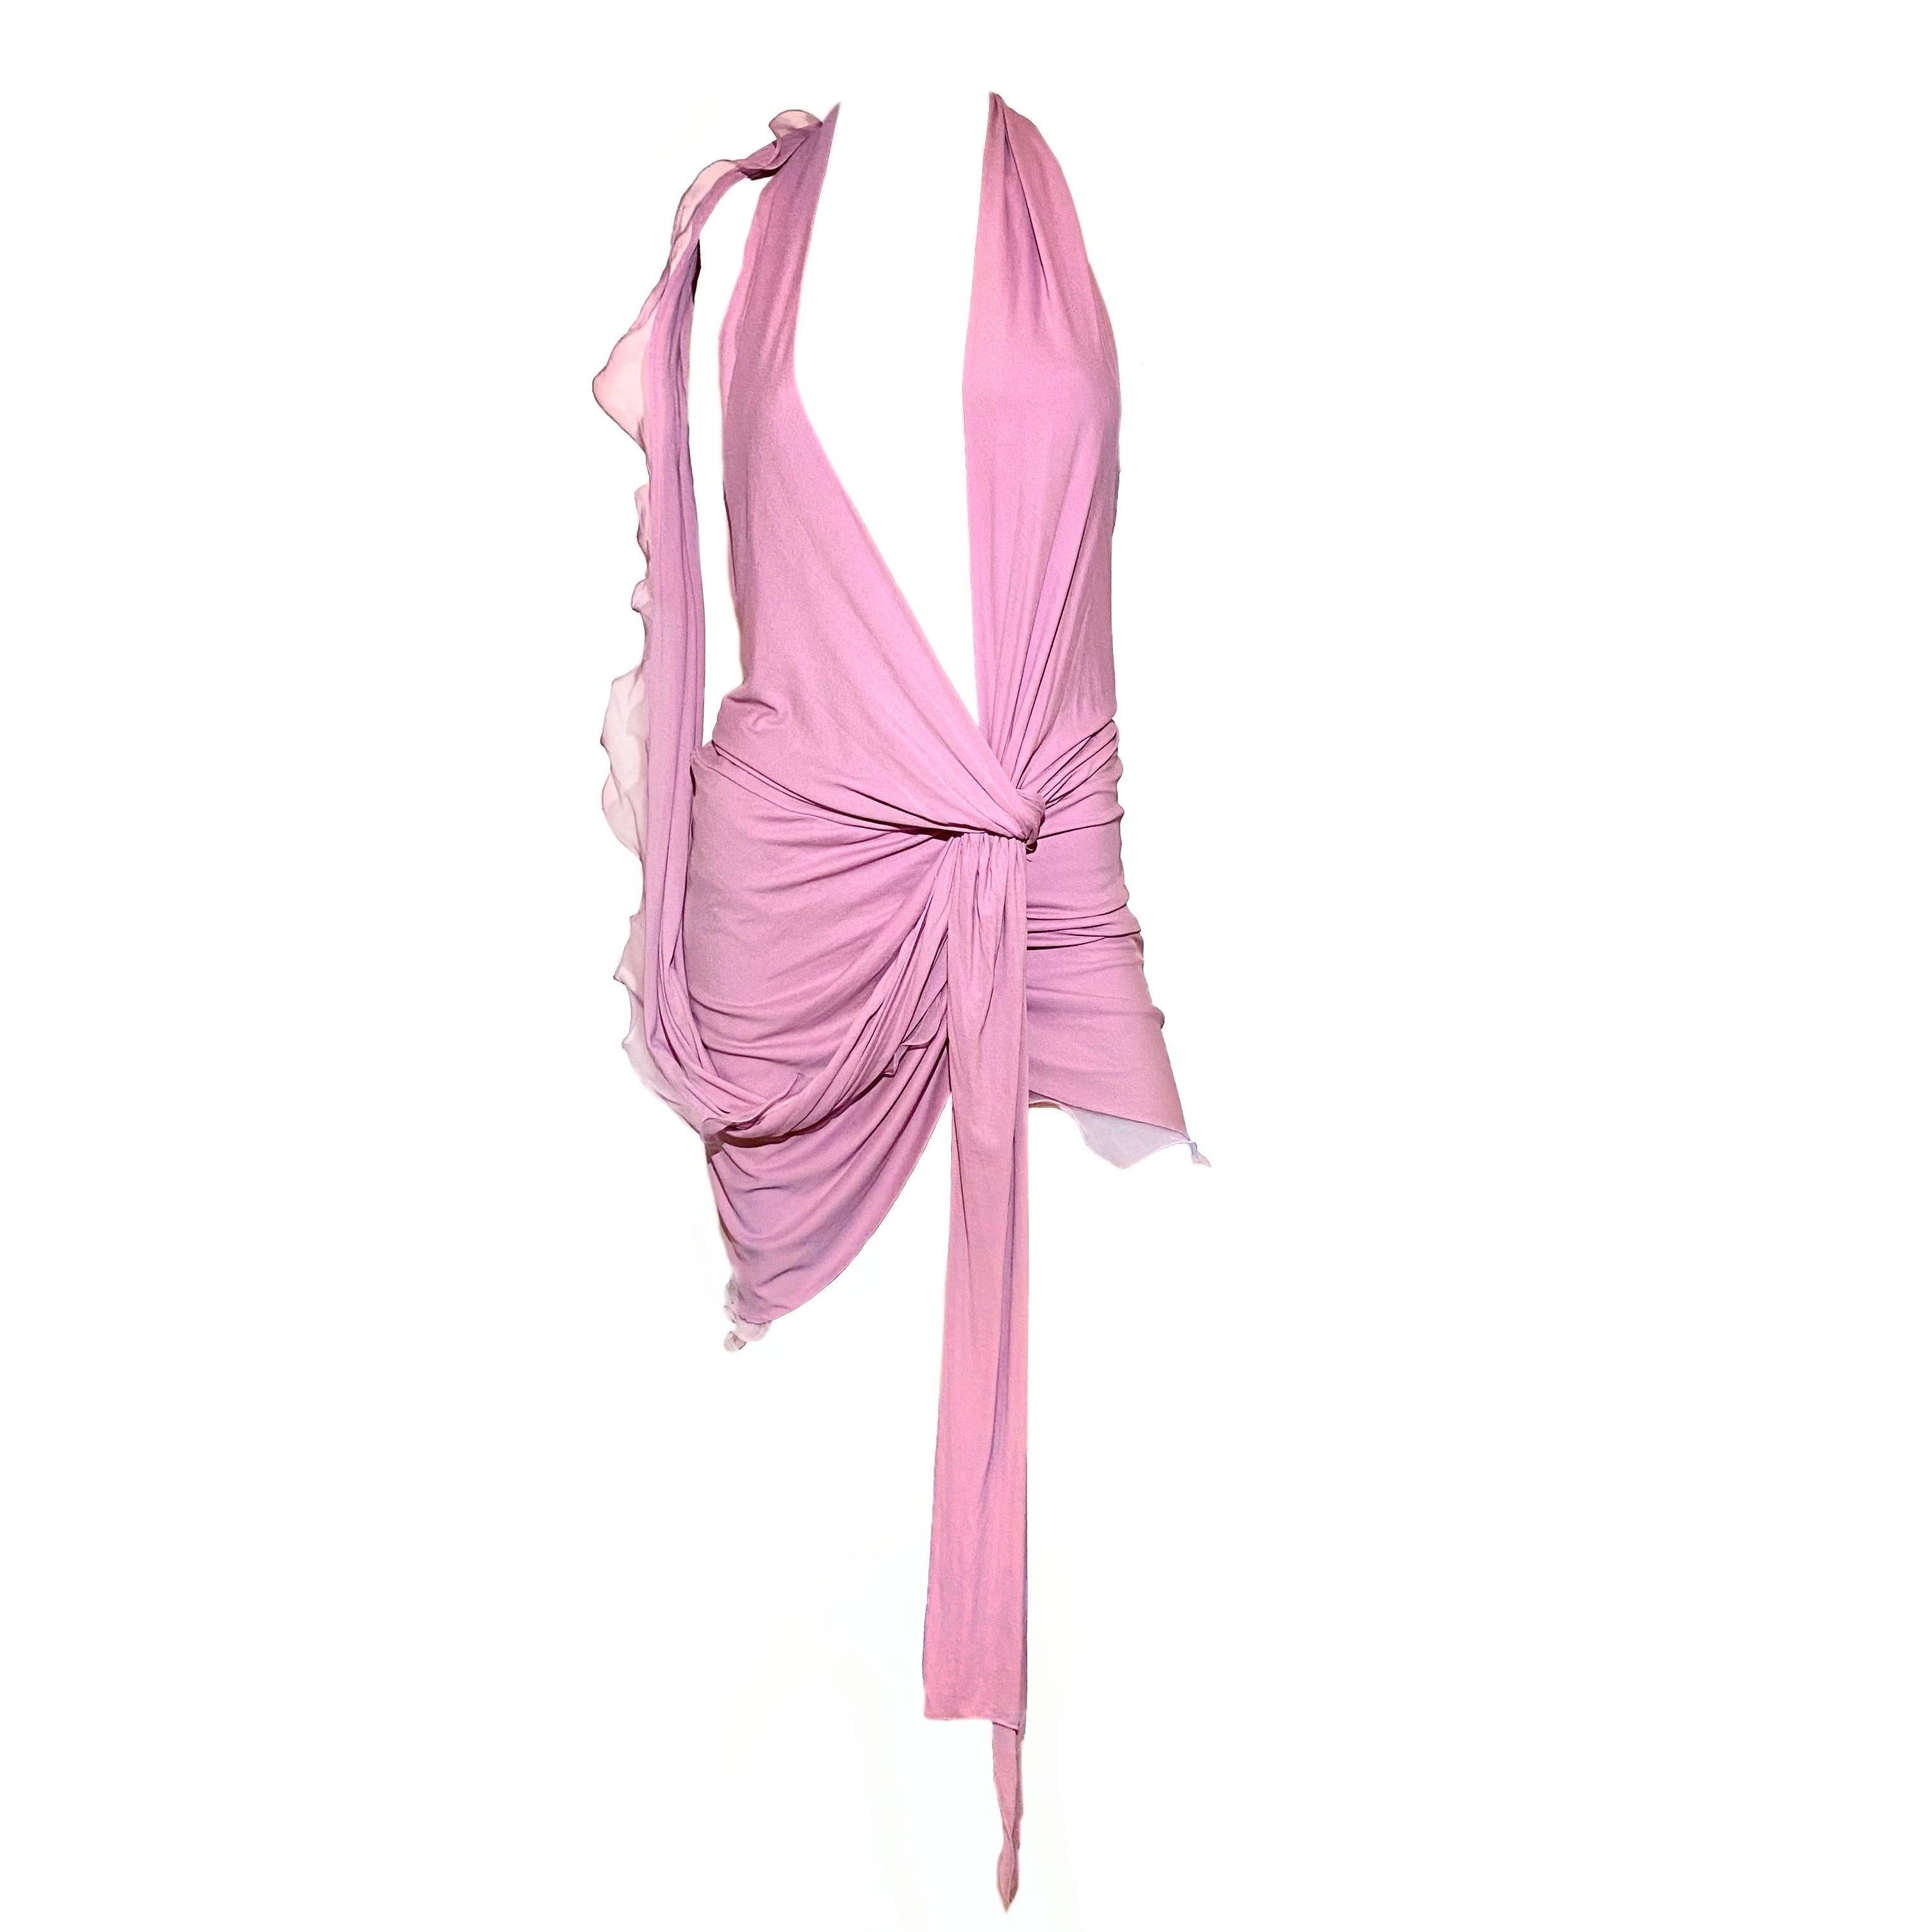 Emanuel Ungaro S/S 2004 runway pink low plunge knotted dress at 1stDibs